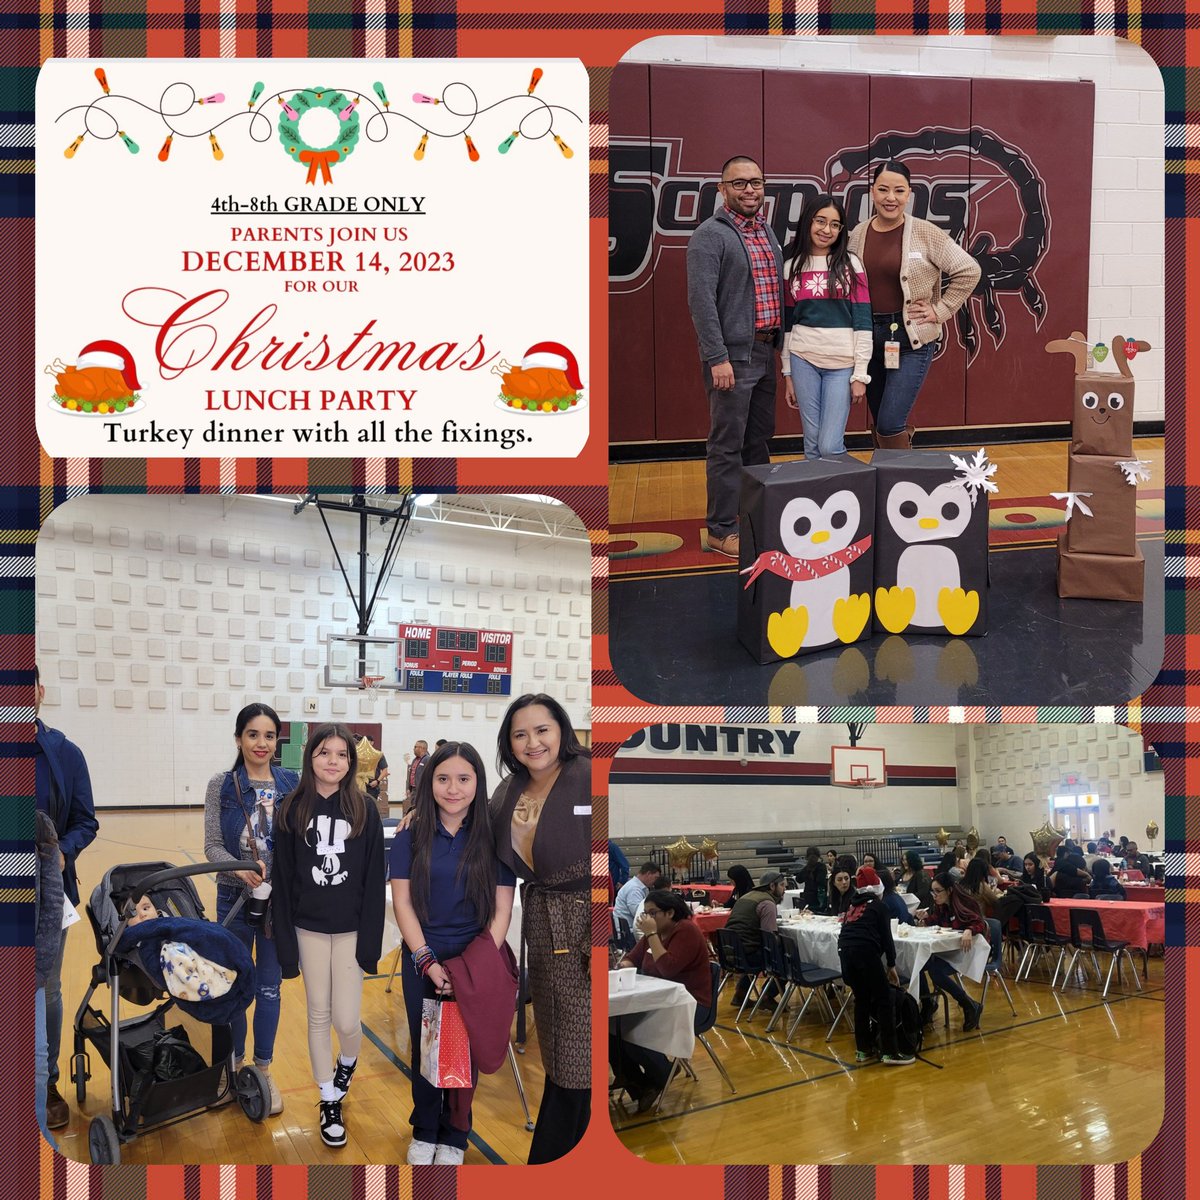 Great turnout for our Family Christmas Lunch! Scorpion parents show up everytime! Thank you at all the staff that make these events happen! @BSybert_Prek8 @ARamirez__BSS @RJimenez_BSS @Vbueno_BSS @ddavislopez_BSS @dsaucedo_bss #ScorpionCountry #TeamSISD